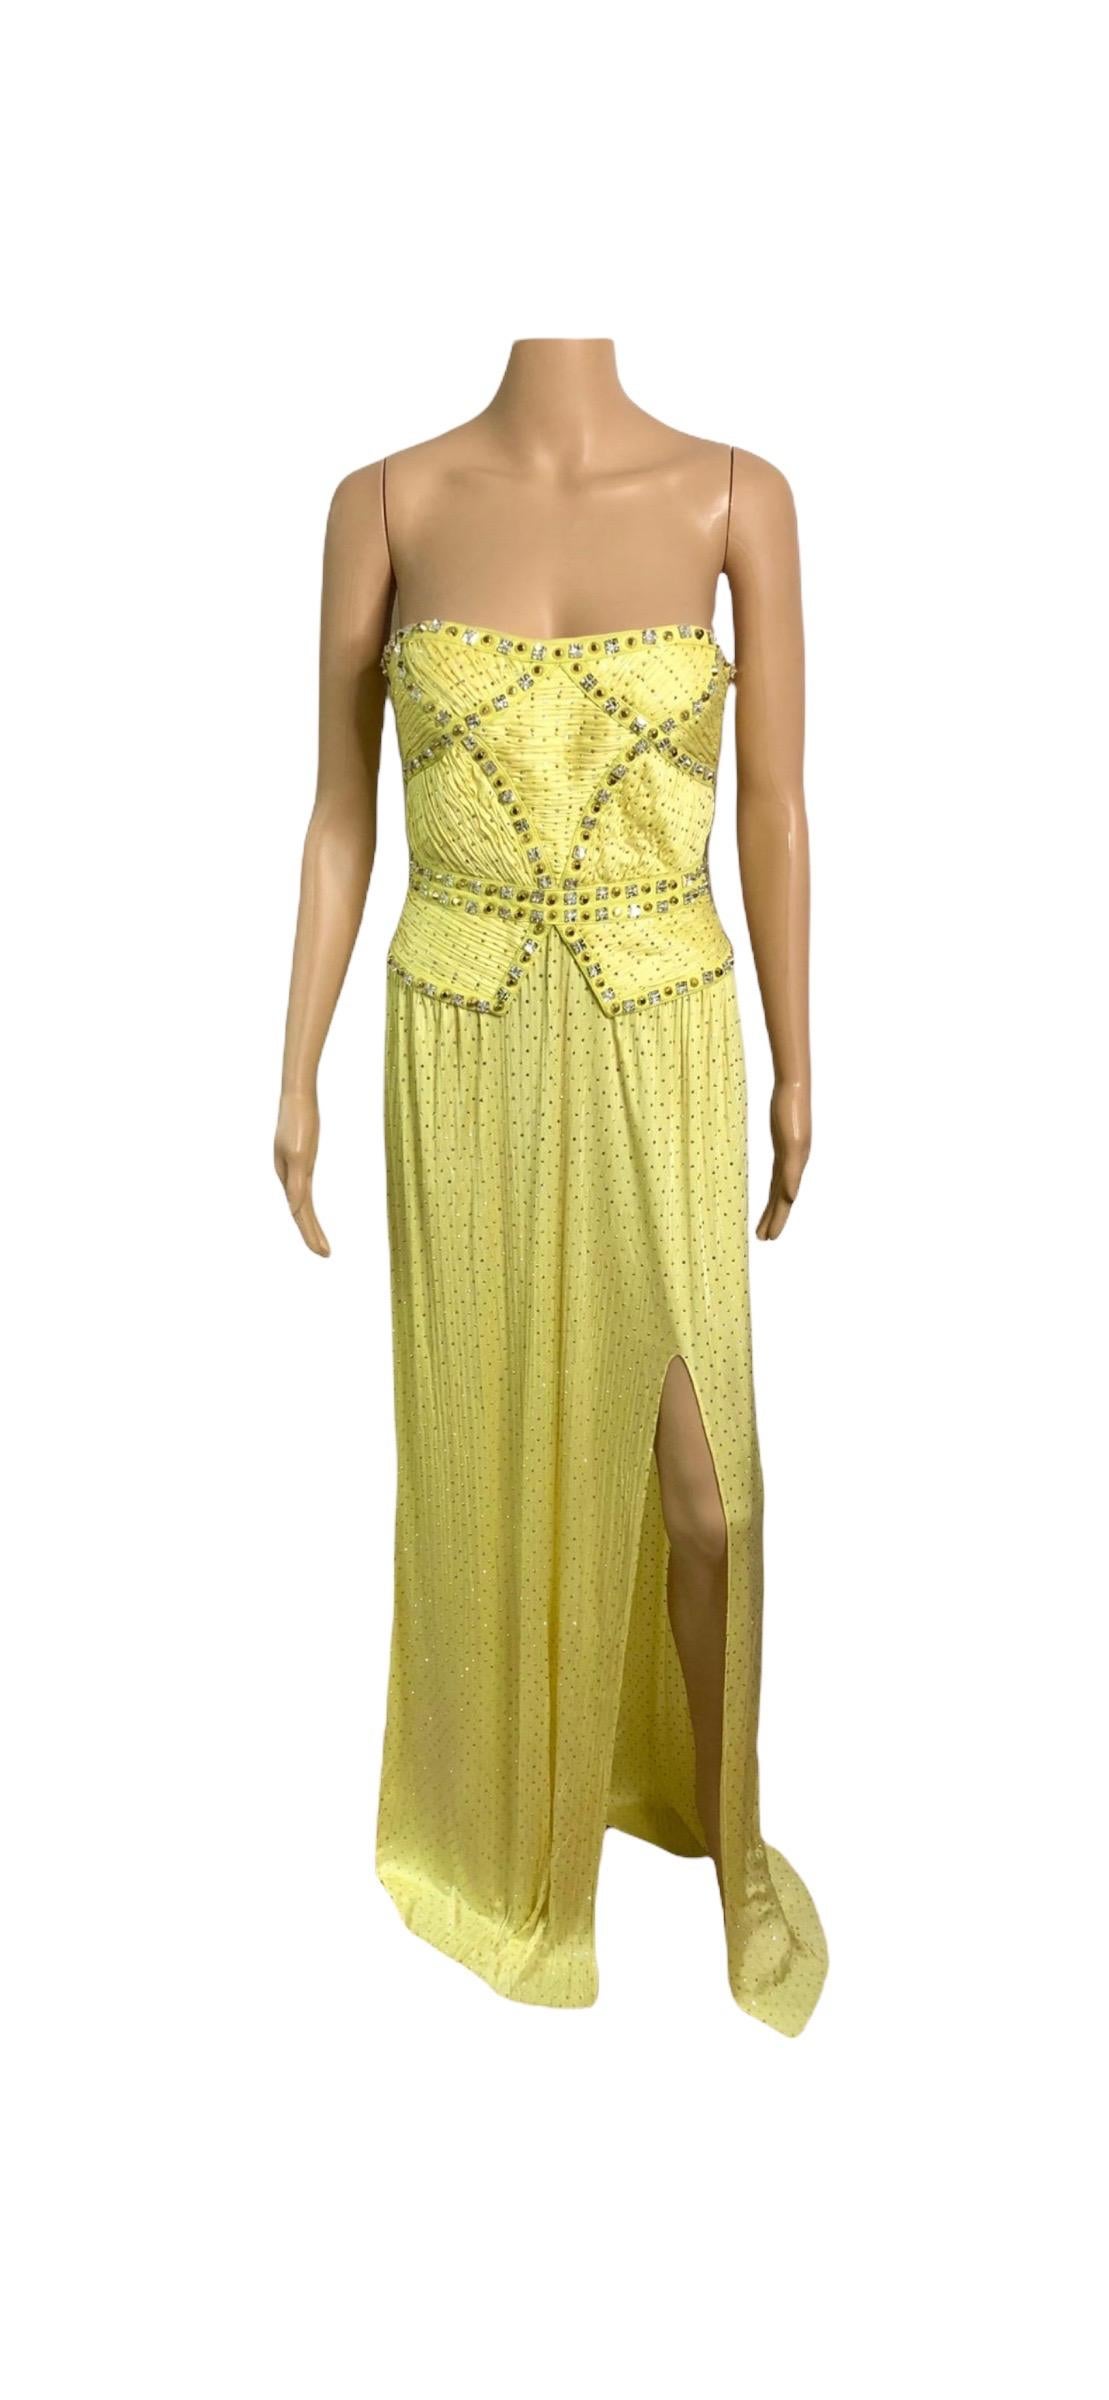 Versace S/S 2012 Runway Bustier Corset Crystal Embellished Evening Dress Gown  For Sale 6